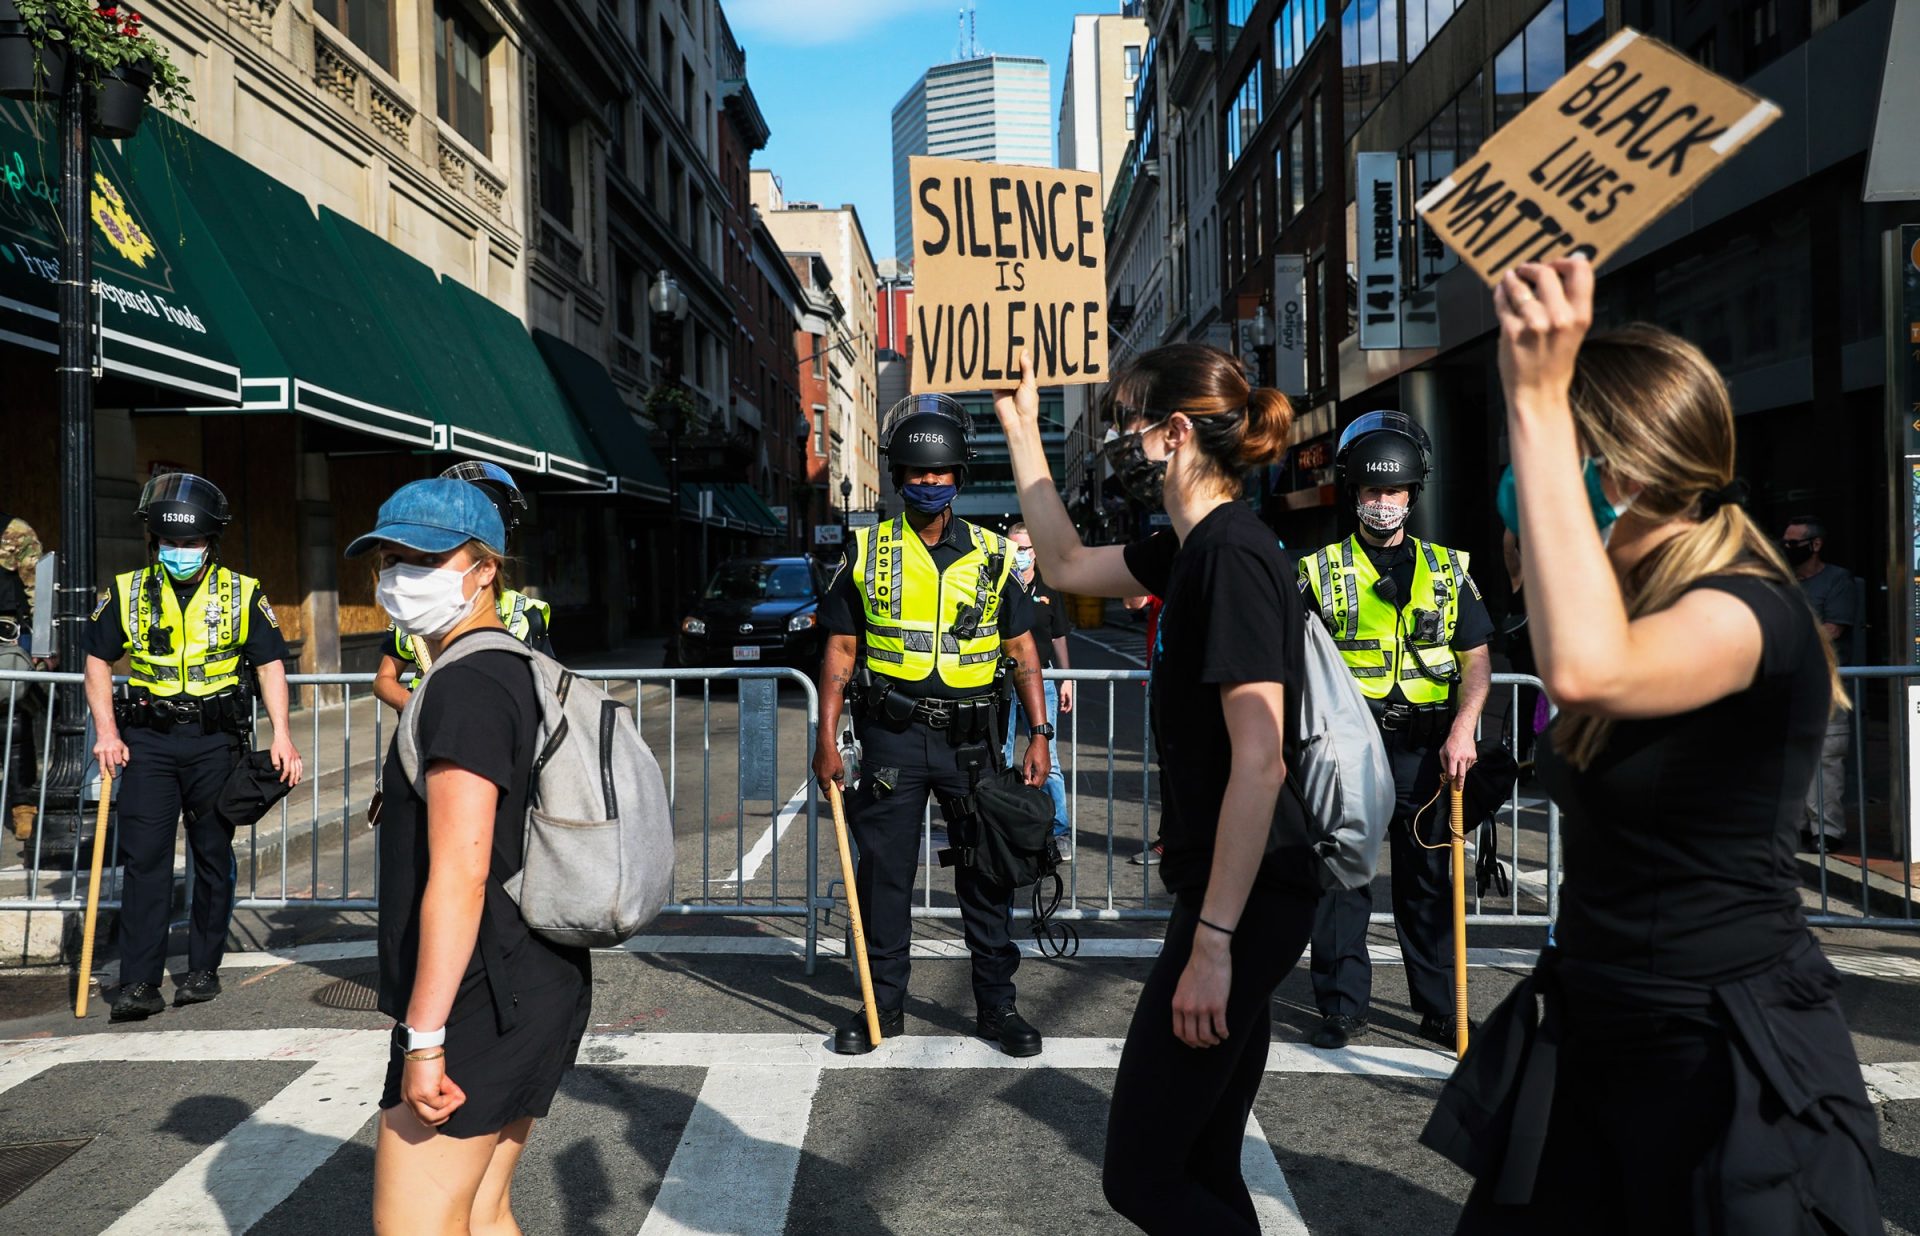 Sizable Tech’s Aim in Policing the Protests